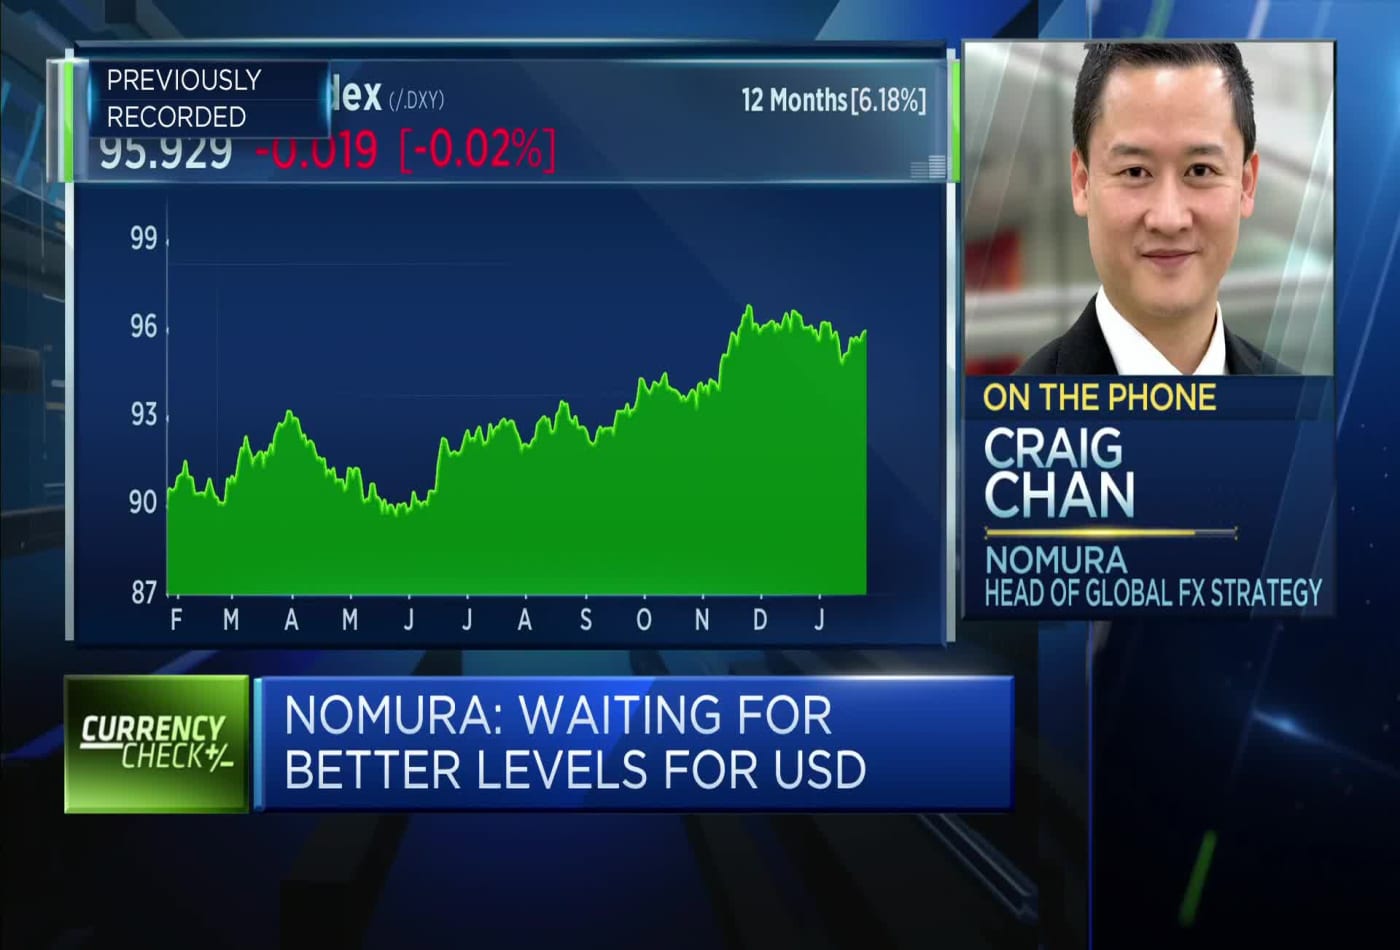 There's 'strong potential' for a weaker U.S. dollar over the next 6 months, says Nomura